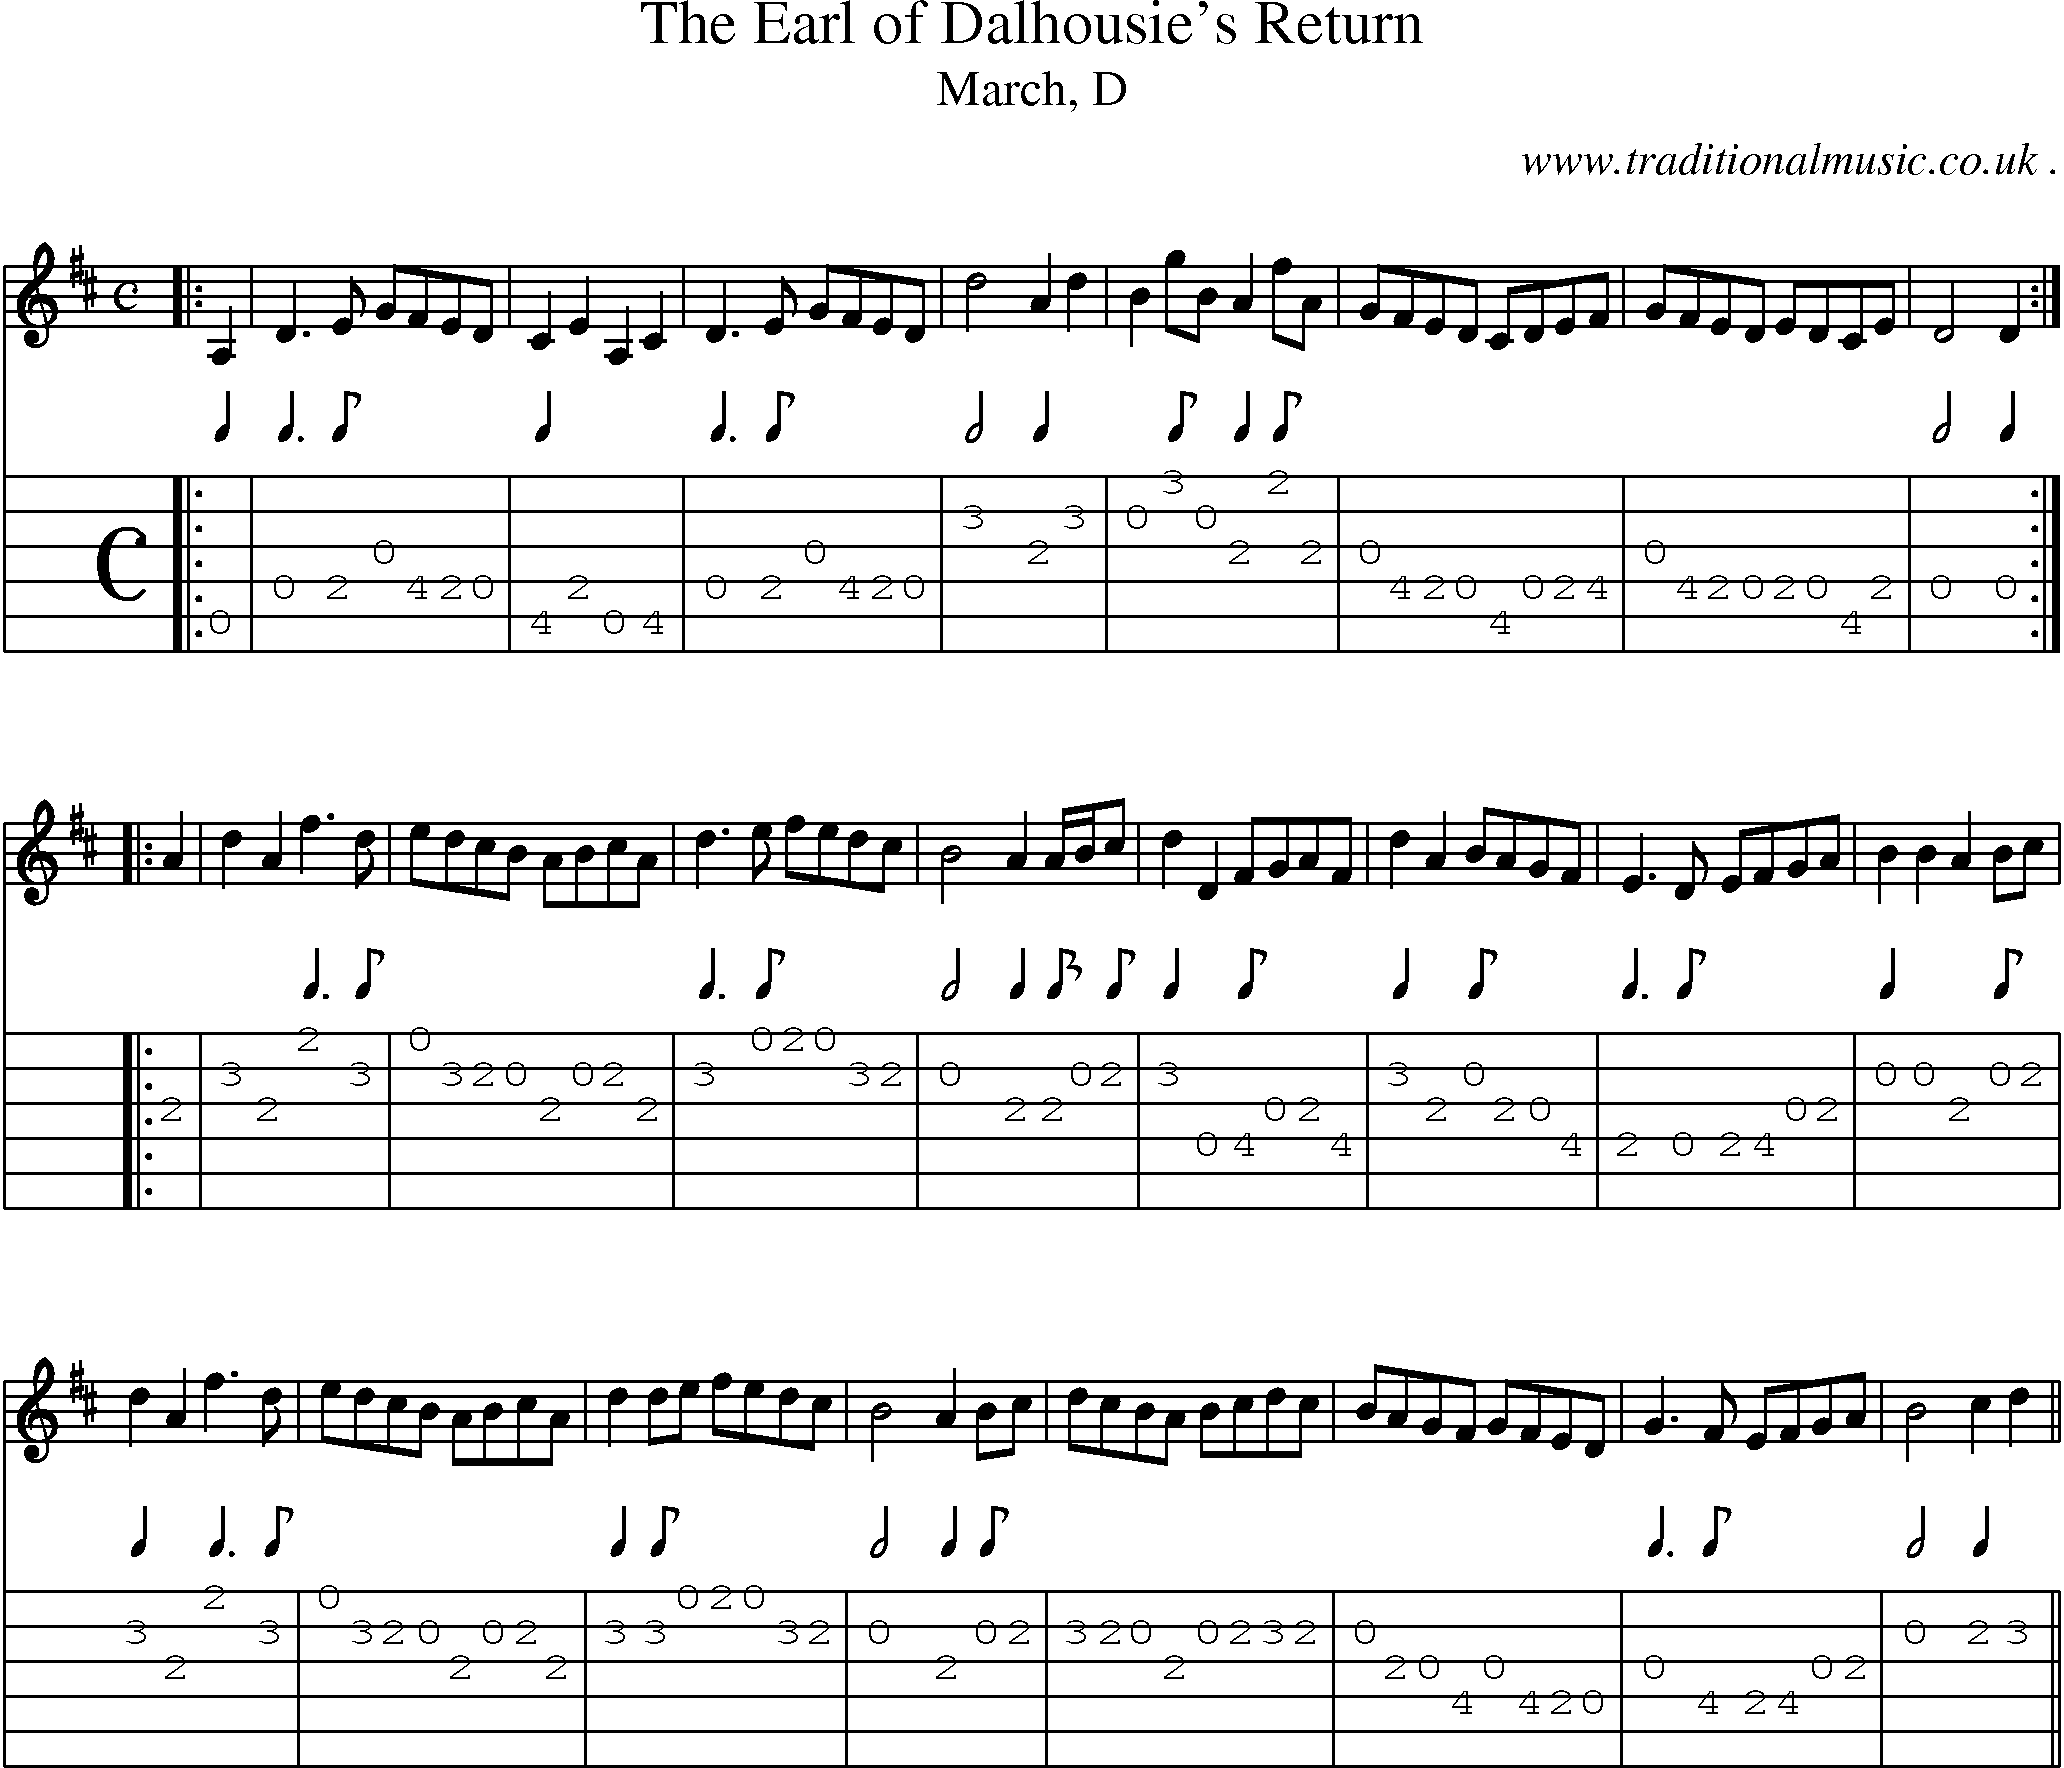 Sheet-music  score, Chords and Guitar Tabs for The Earl Of Dalhousies Return